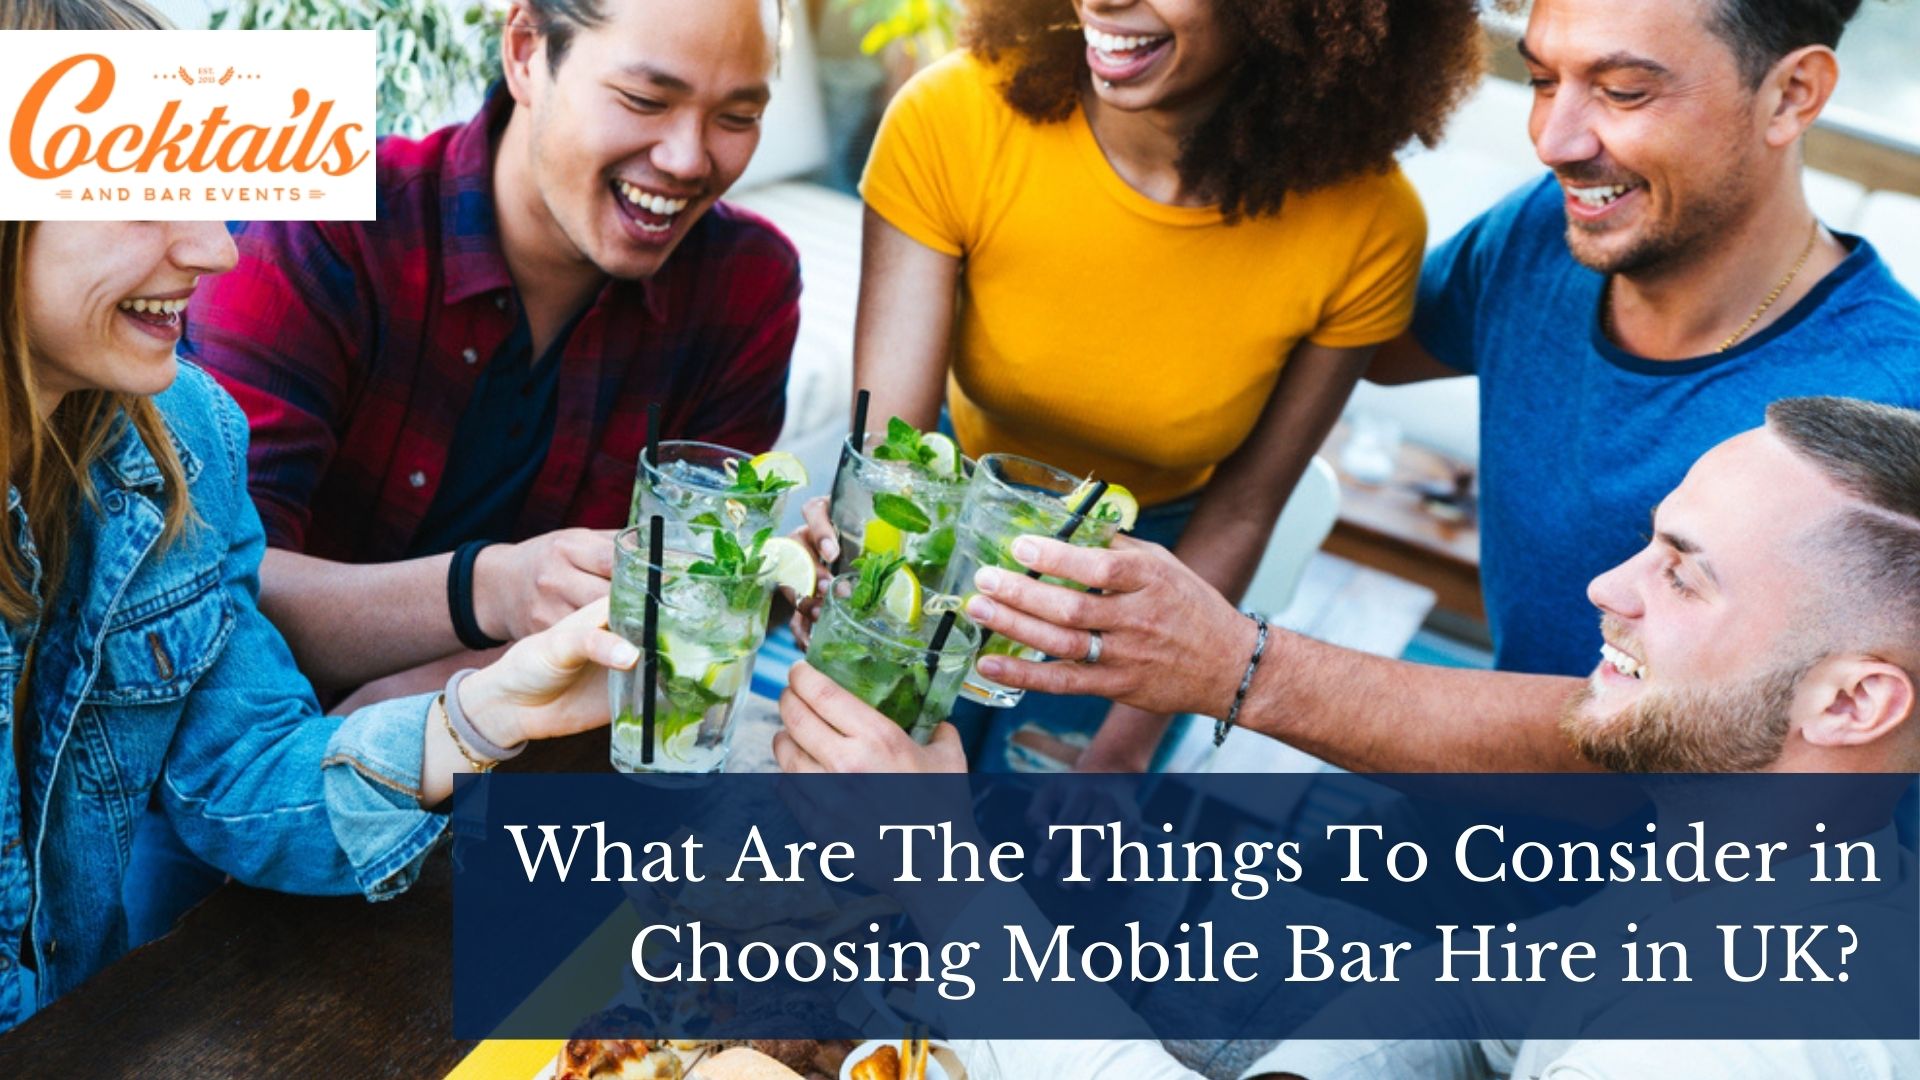 What Are The Things To Consider in Choosing Mobile Bar Hire in UK? -